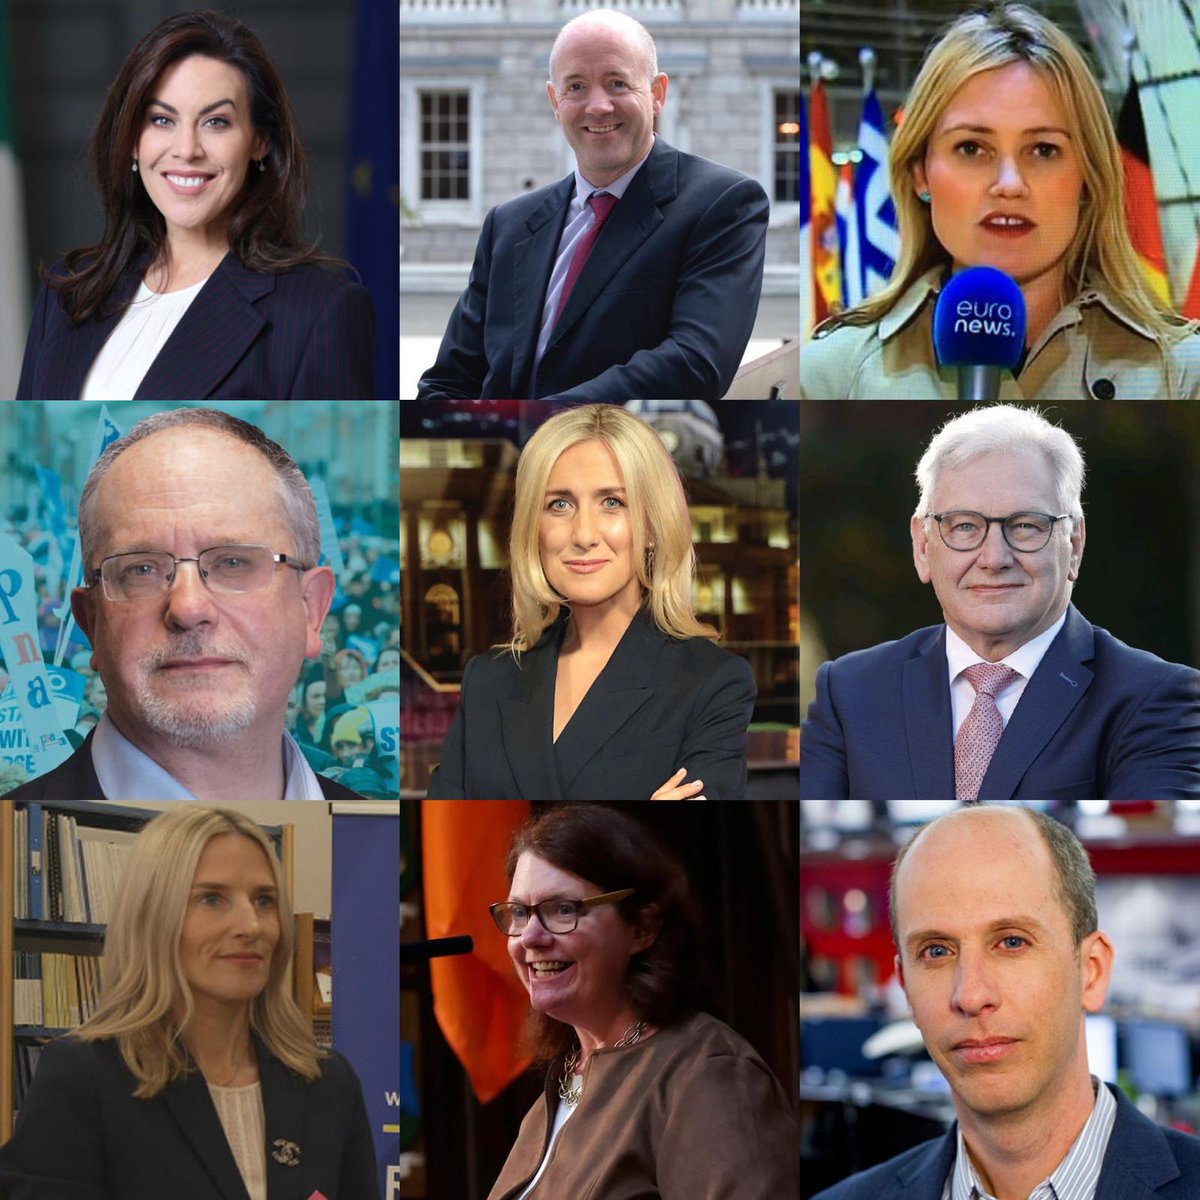 #TonightVMTV at 10pm with @ciarathedoc 🚨Waging wars and Irish neutrality 🚨Irish people drinking less overall but more at home 🚨Day 2 of Trump's hush money trial @CarrollJennifer @BerryCathal @ShonaMurray_ @MickBarryTD @PatCrottyKK @amcdoyle @SheilaGilheany @awzurcher